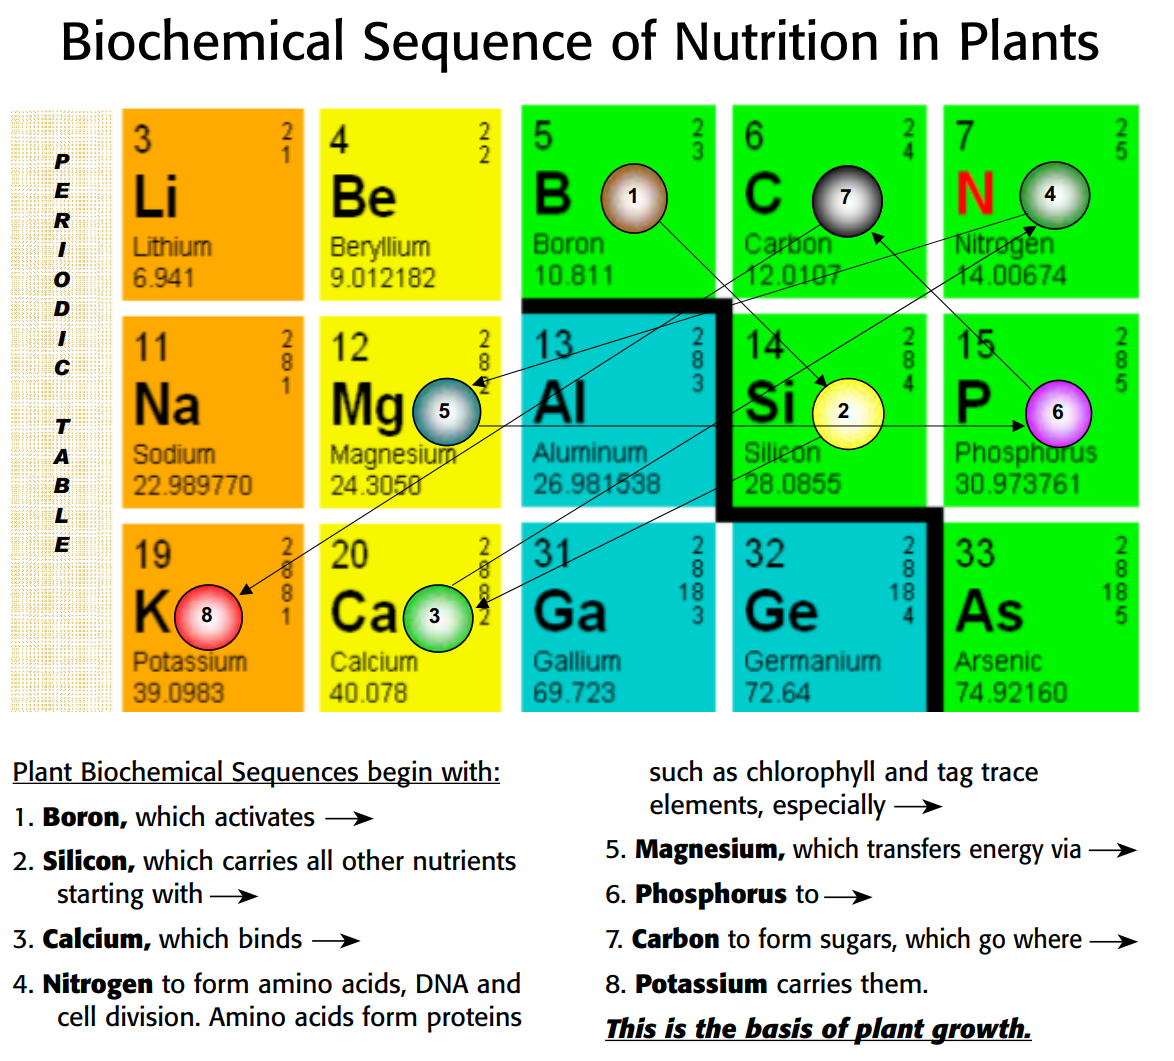 The biochemical sequence of nutrition in plants.png